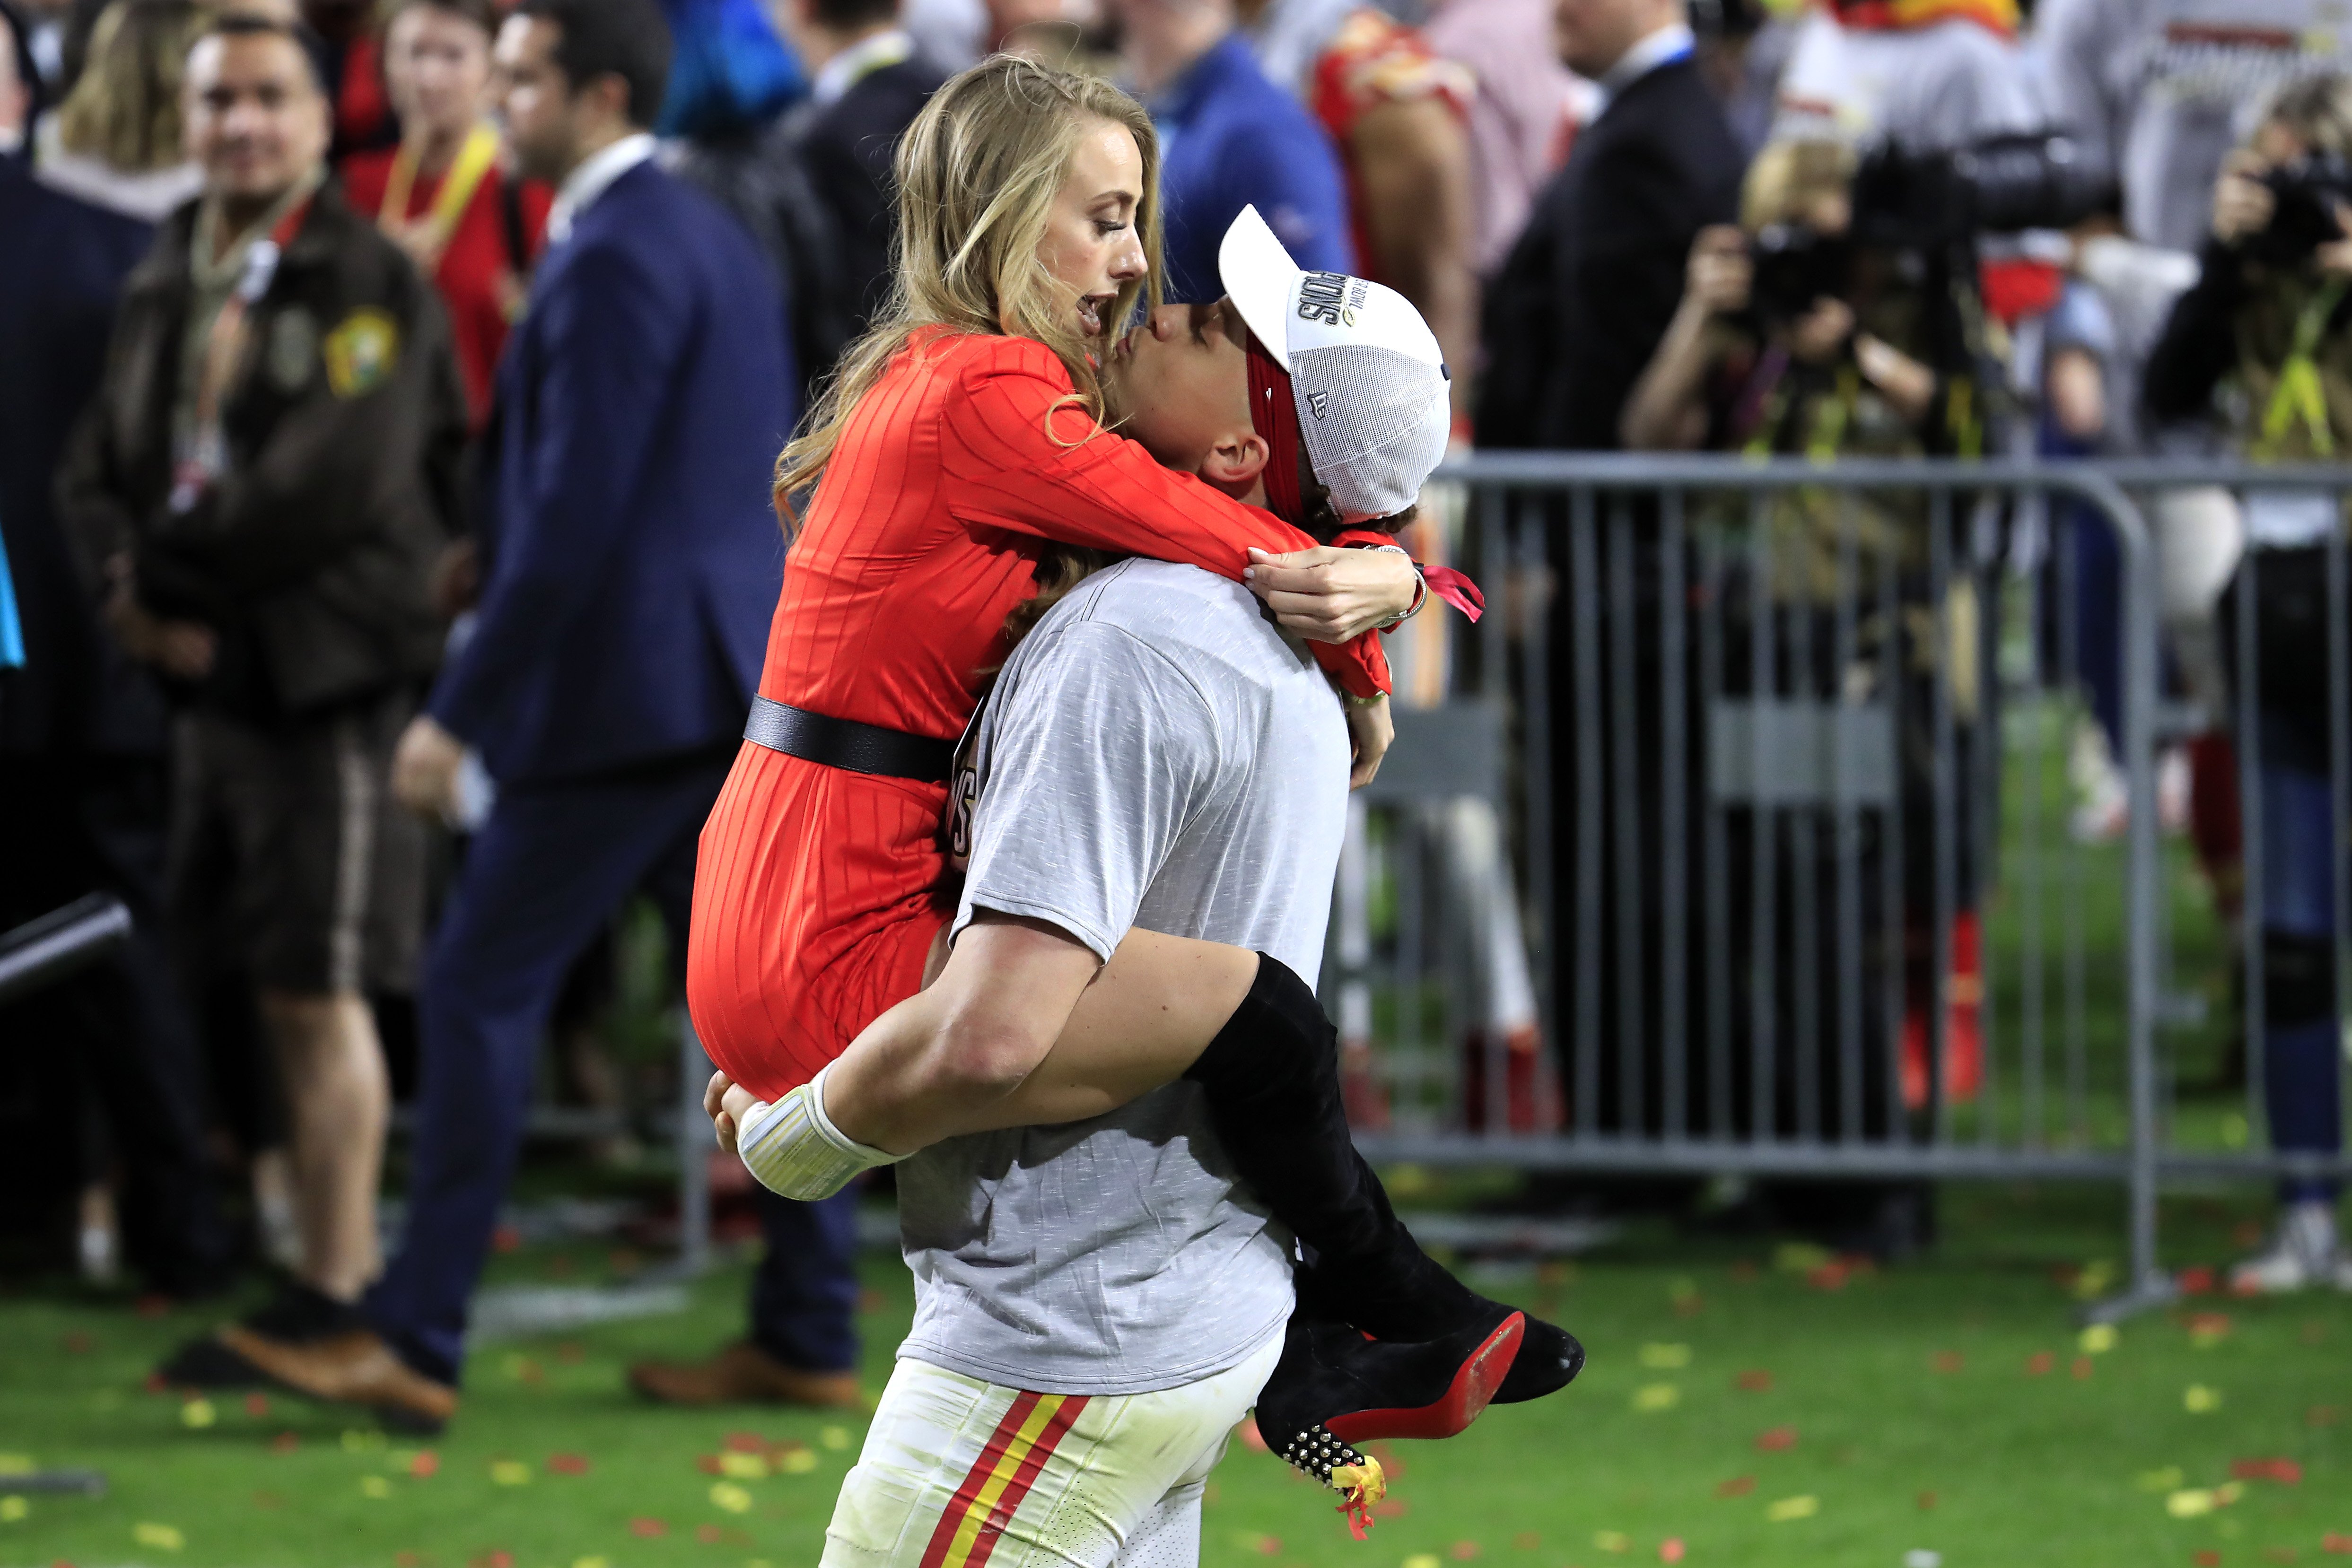 Patrick Mahomes and his fiancee, Brittany Matthews pictured celebrating after the Kansas City Chiefs defeated  the San Francisco 49ers, 2020, Florida. | Photo: Getty Images